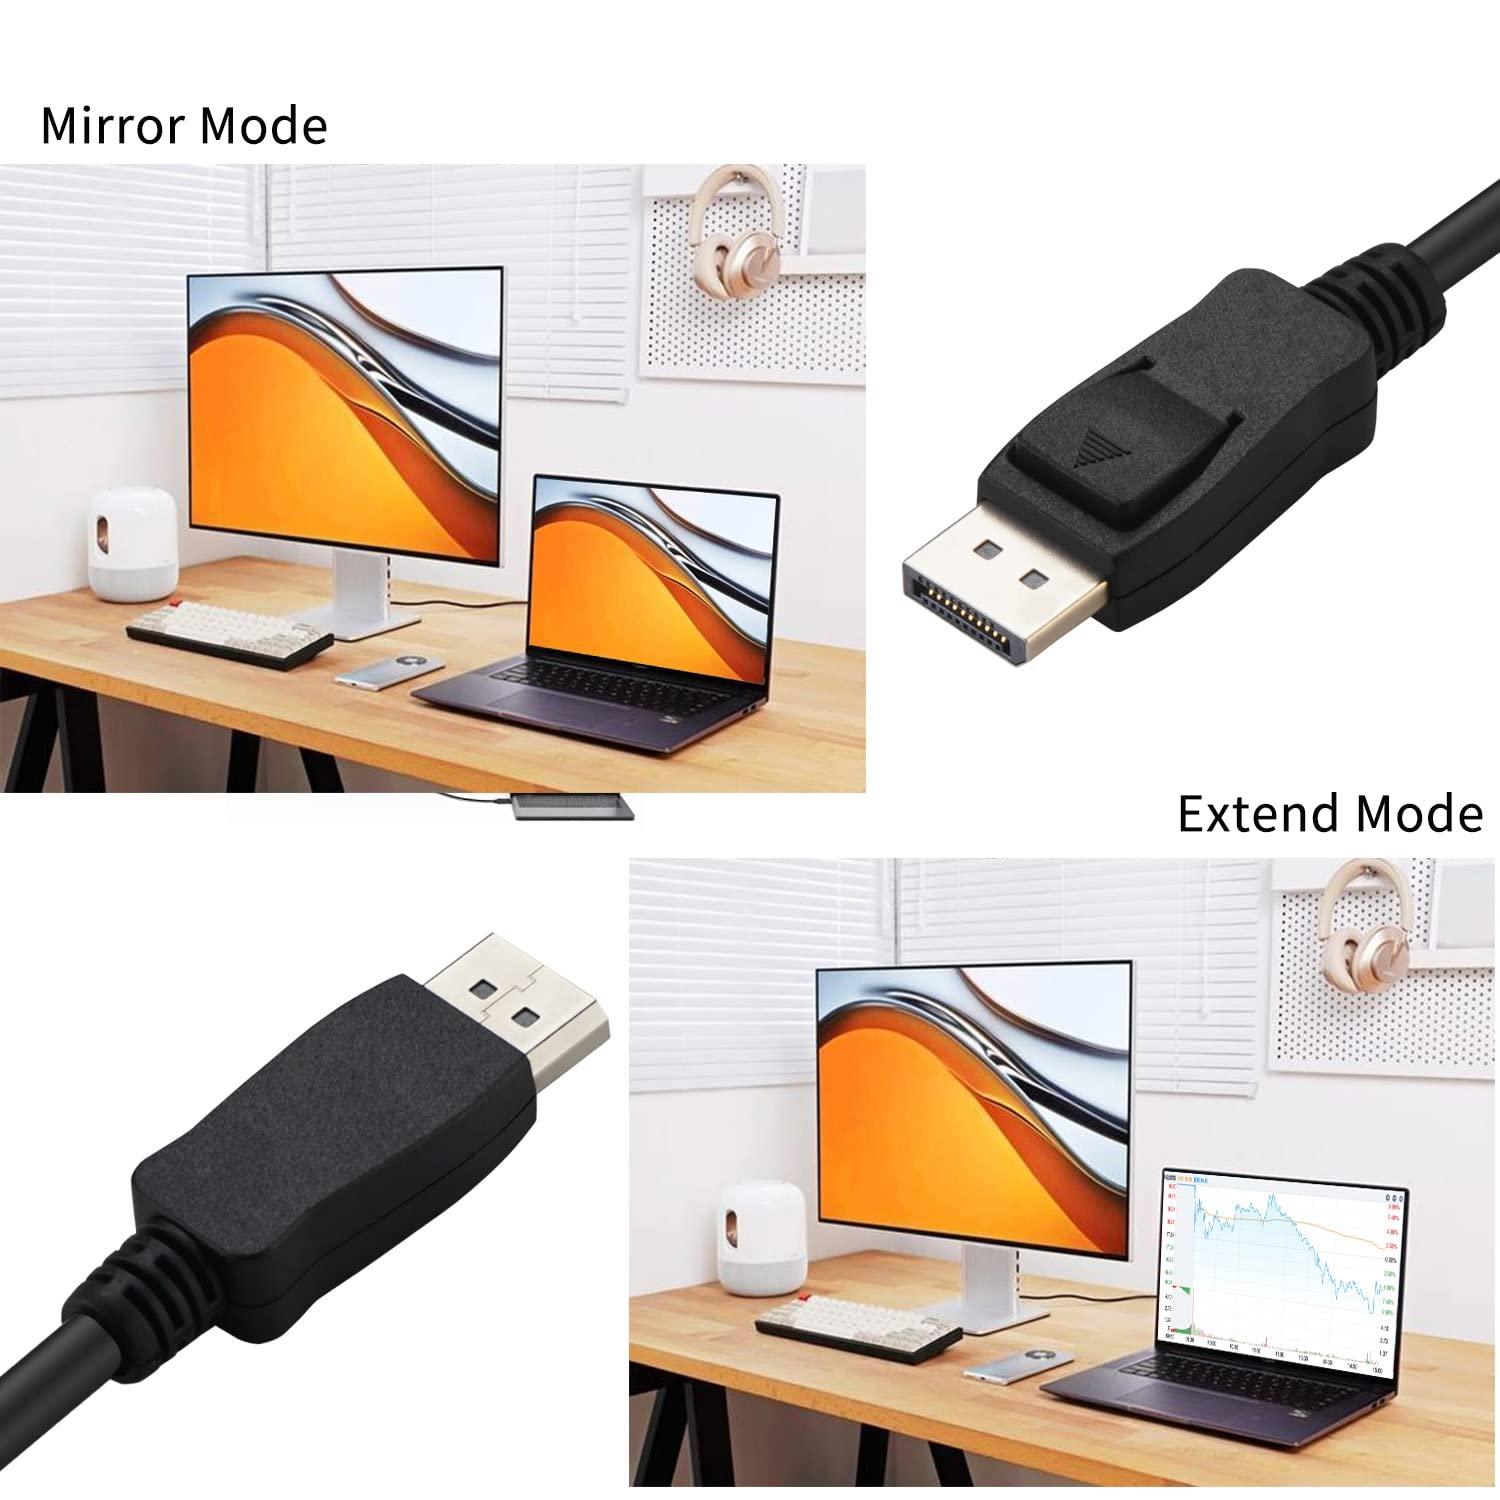 8K DP Cable - DP Cable 1.4, high Speed 8K@60Hz, 4K@144Hz, 2k@240Hz 144Hz Comptable,Display Port Cable with Data Transfer Speed up to 25.92 Gbps, Black 4.9ft/1.5M (Set of 2) - CKL KVM Switches